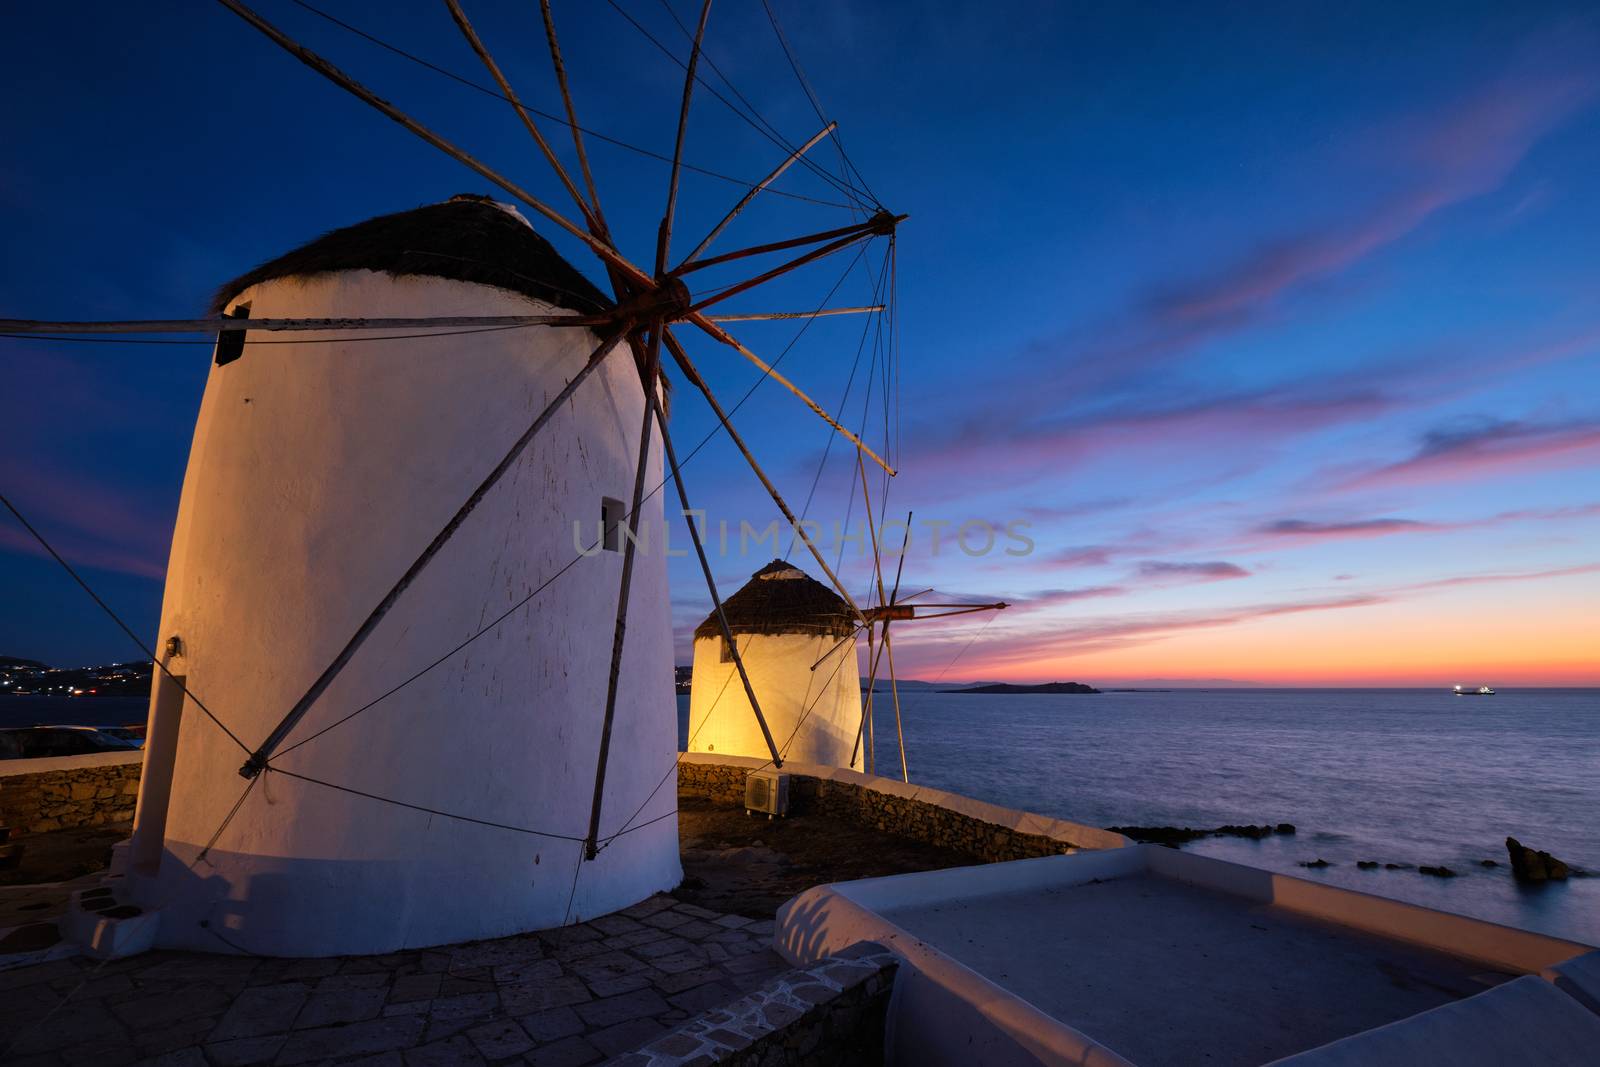 Scenic view of famous Mykonos Chora town windmills. Traditional greek windmills on Mykonos island illuminated in the evening, Cyclades, Greece. Walking with steadycam.